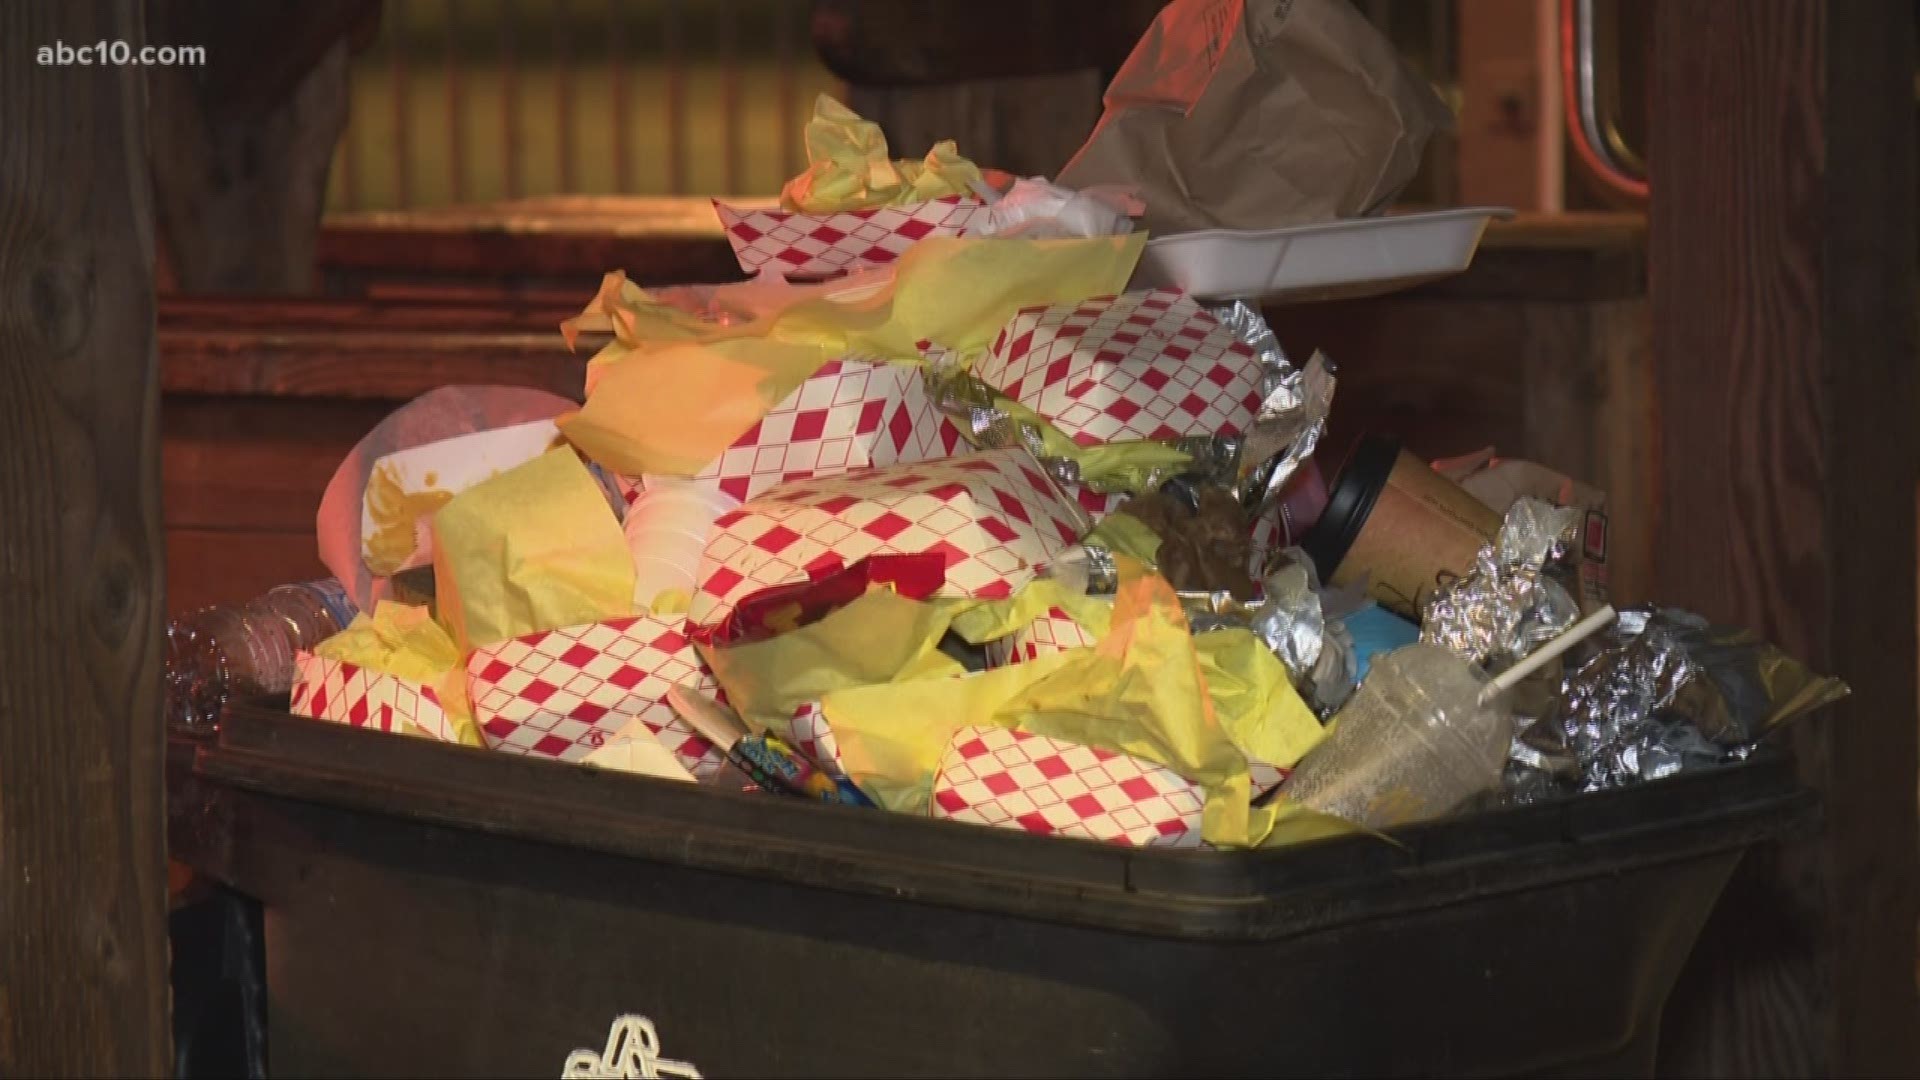 It's time to clean the streets after a night of celebrating the new year in Old Sacramento.